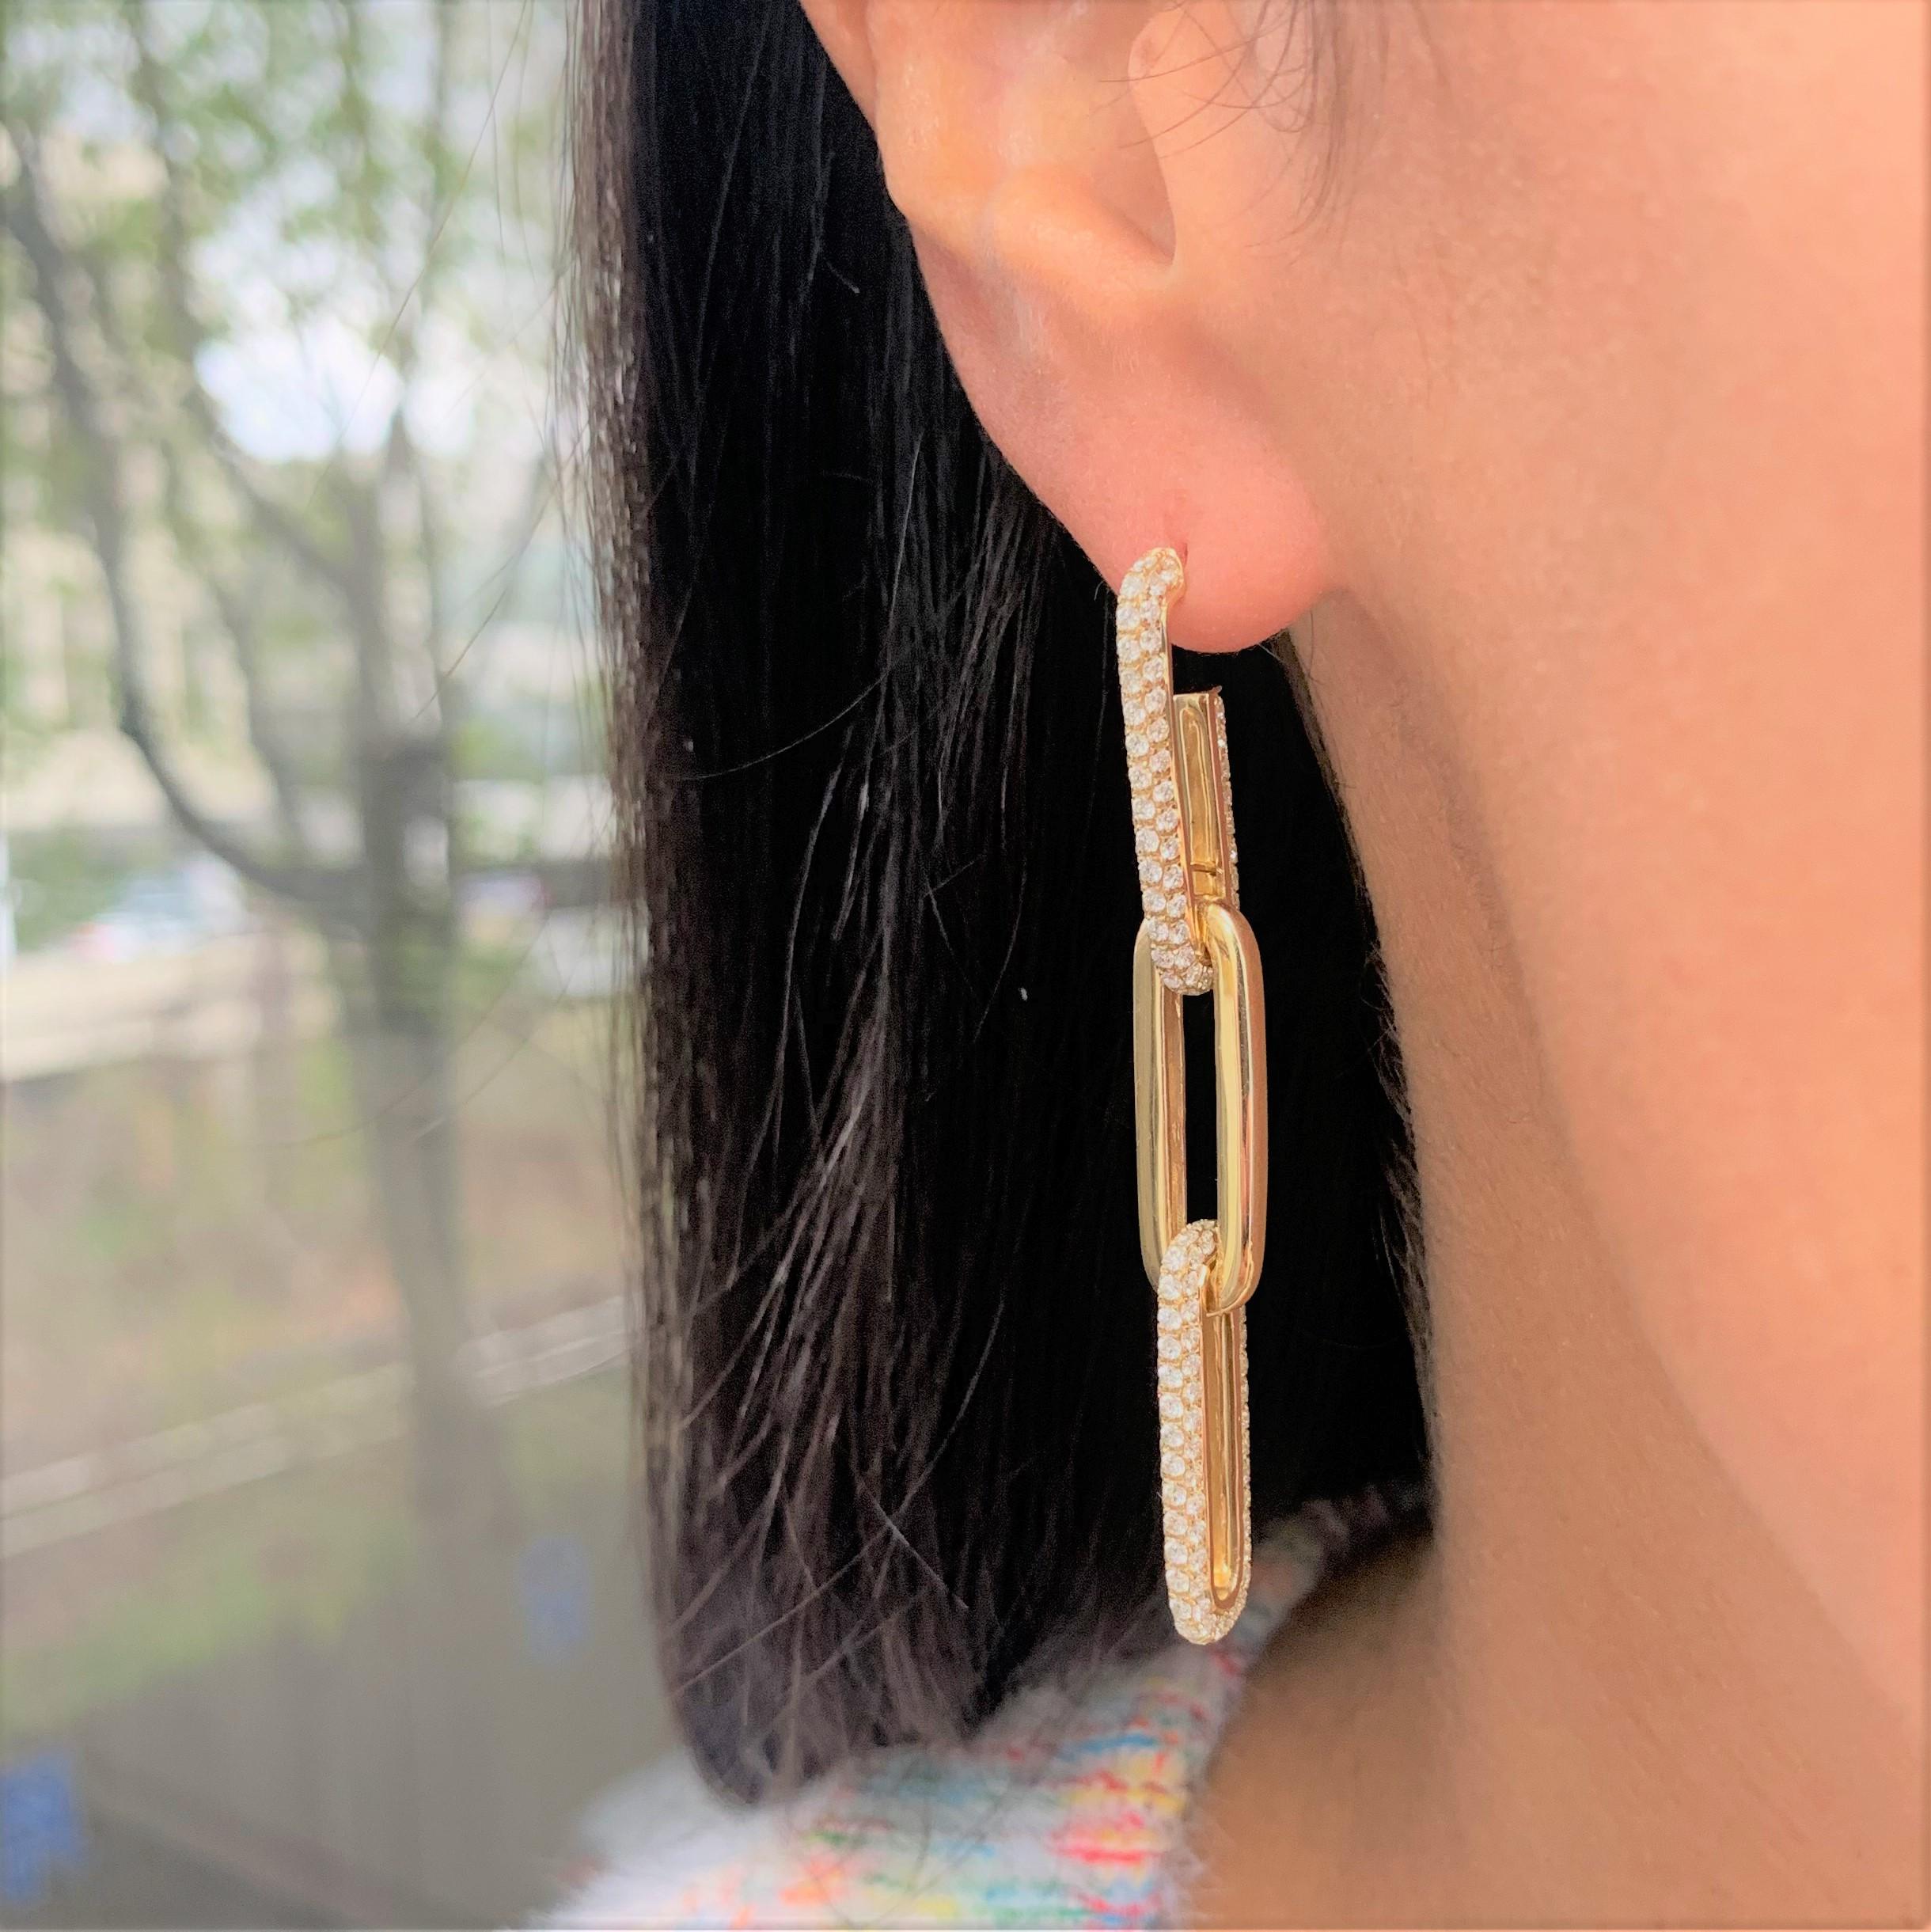 These Trendy and appealing 14k gold and Diamond Dangle Link Earrings are a must-have! They make the best addition to your jewelry collection! Featuring  3.73 ct. of Diamonds. Available in white, yellow & rose gold.  

-14K Gold  
-3.73 ct. White